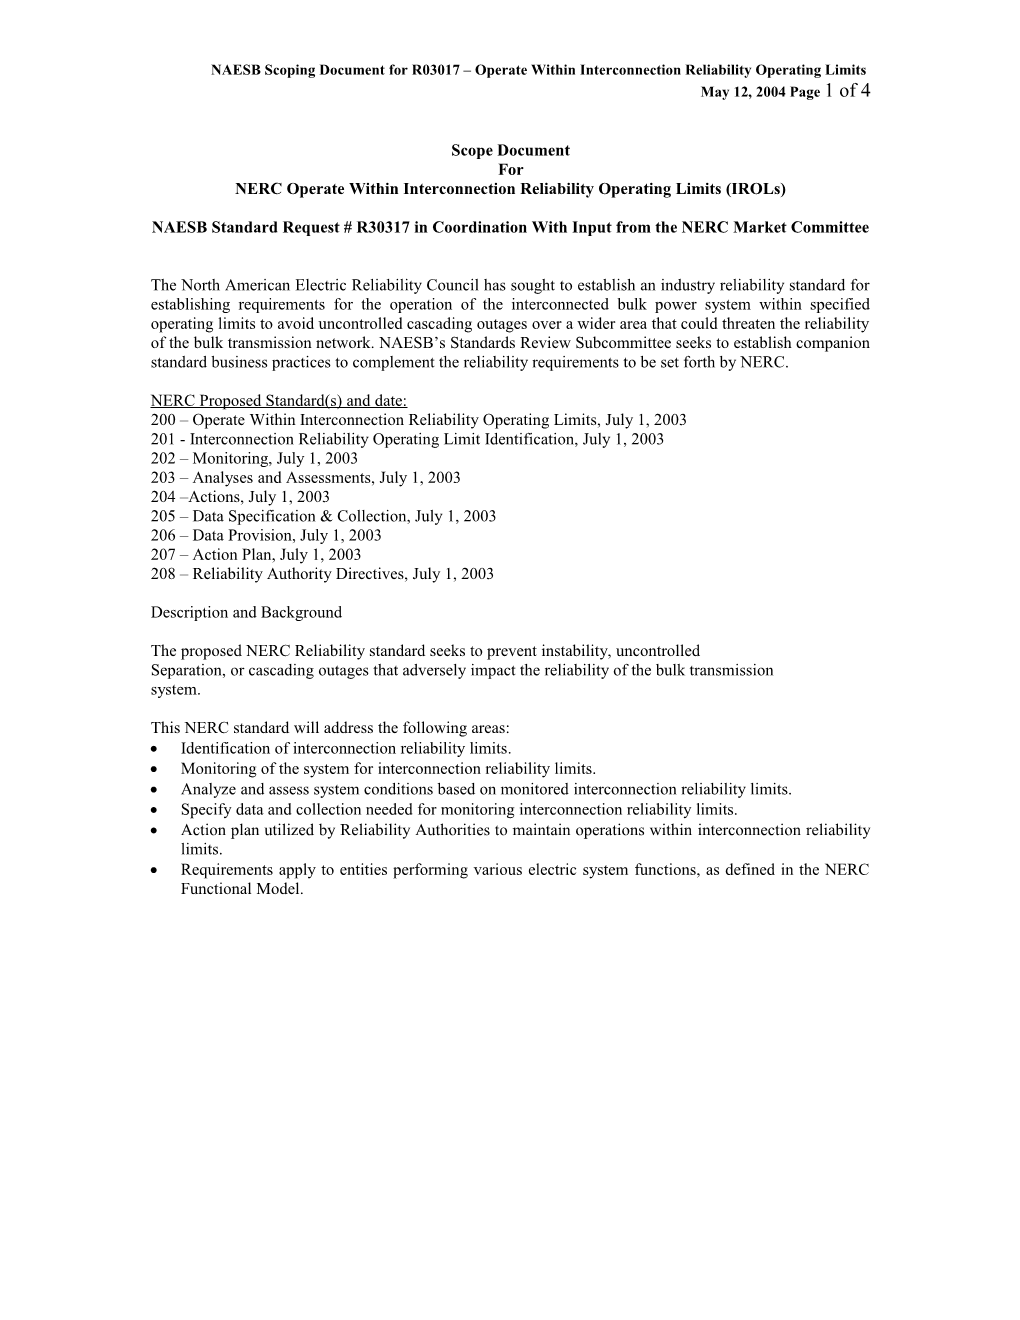 NAESB Scoping Document for R03017 Operate Within Interconnection Reliability Operating Limits